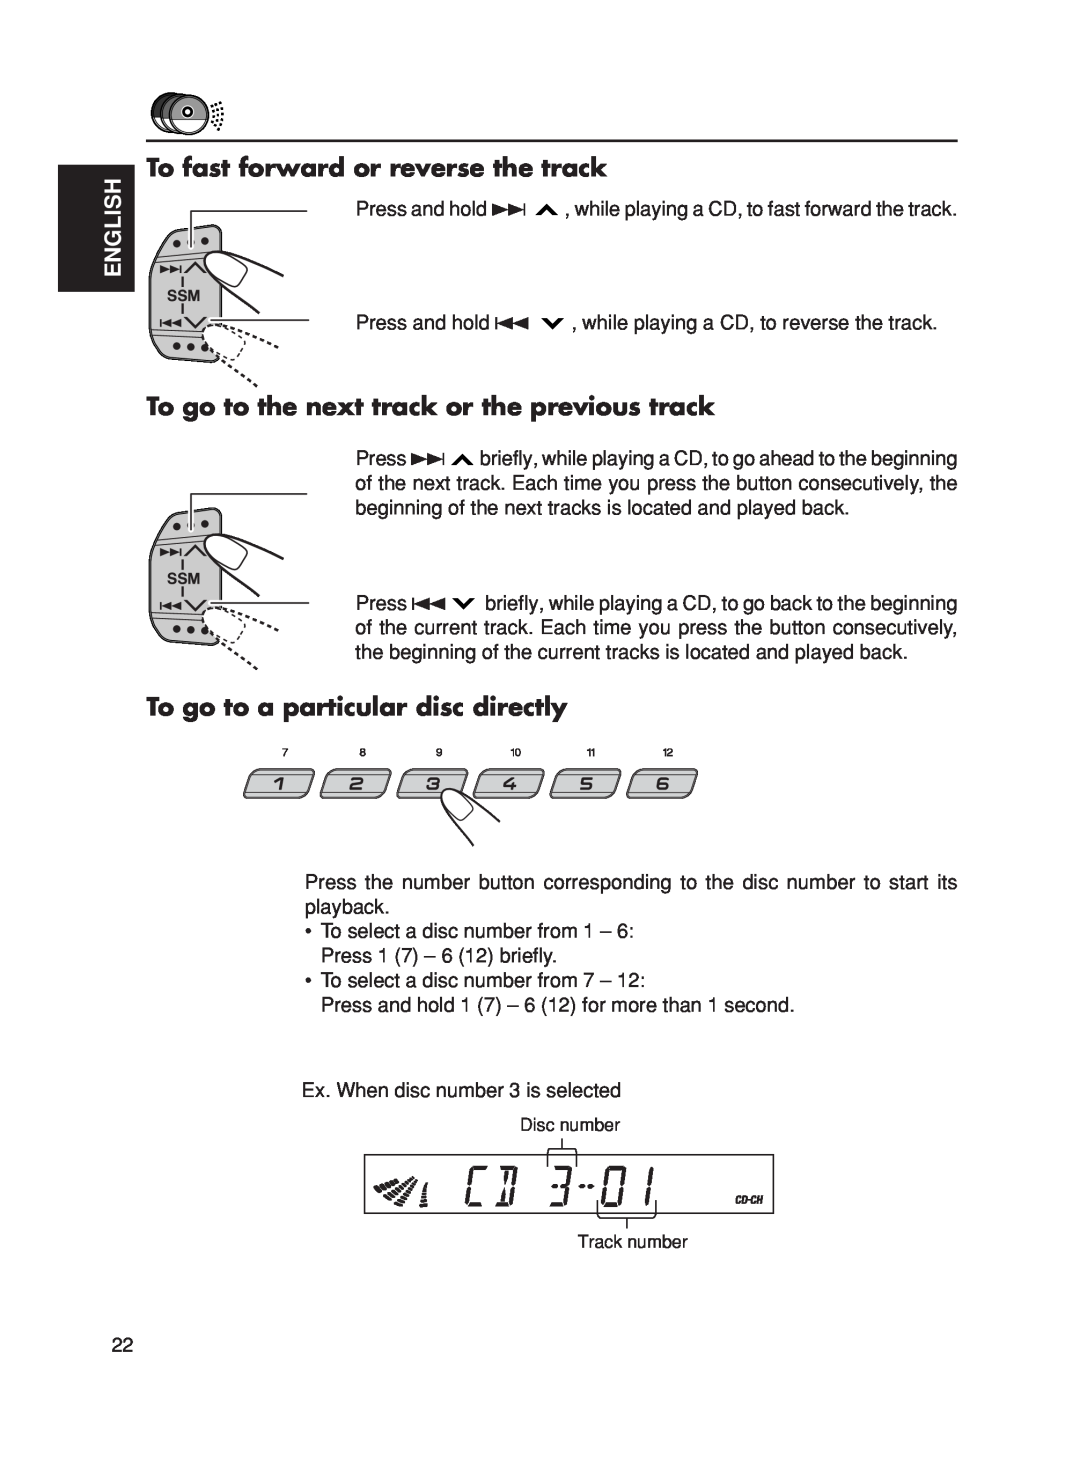 JVC KS-FX270 manual To fast forward or reverse the track, To go to the next track or the previous track, English 